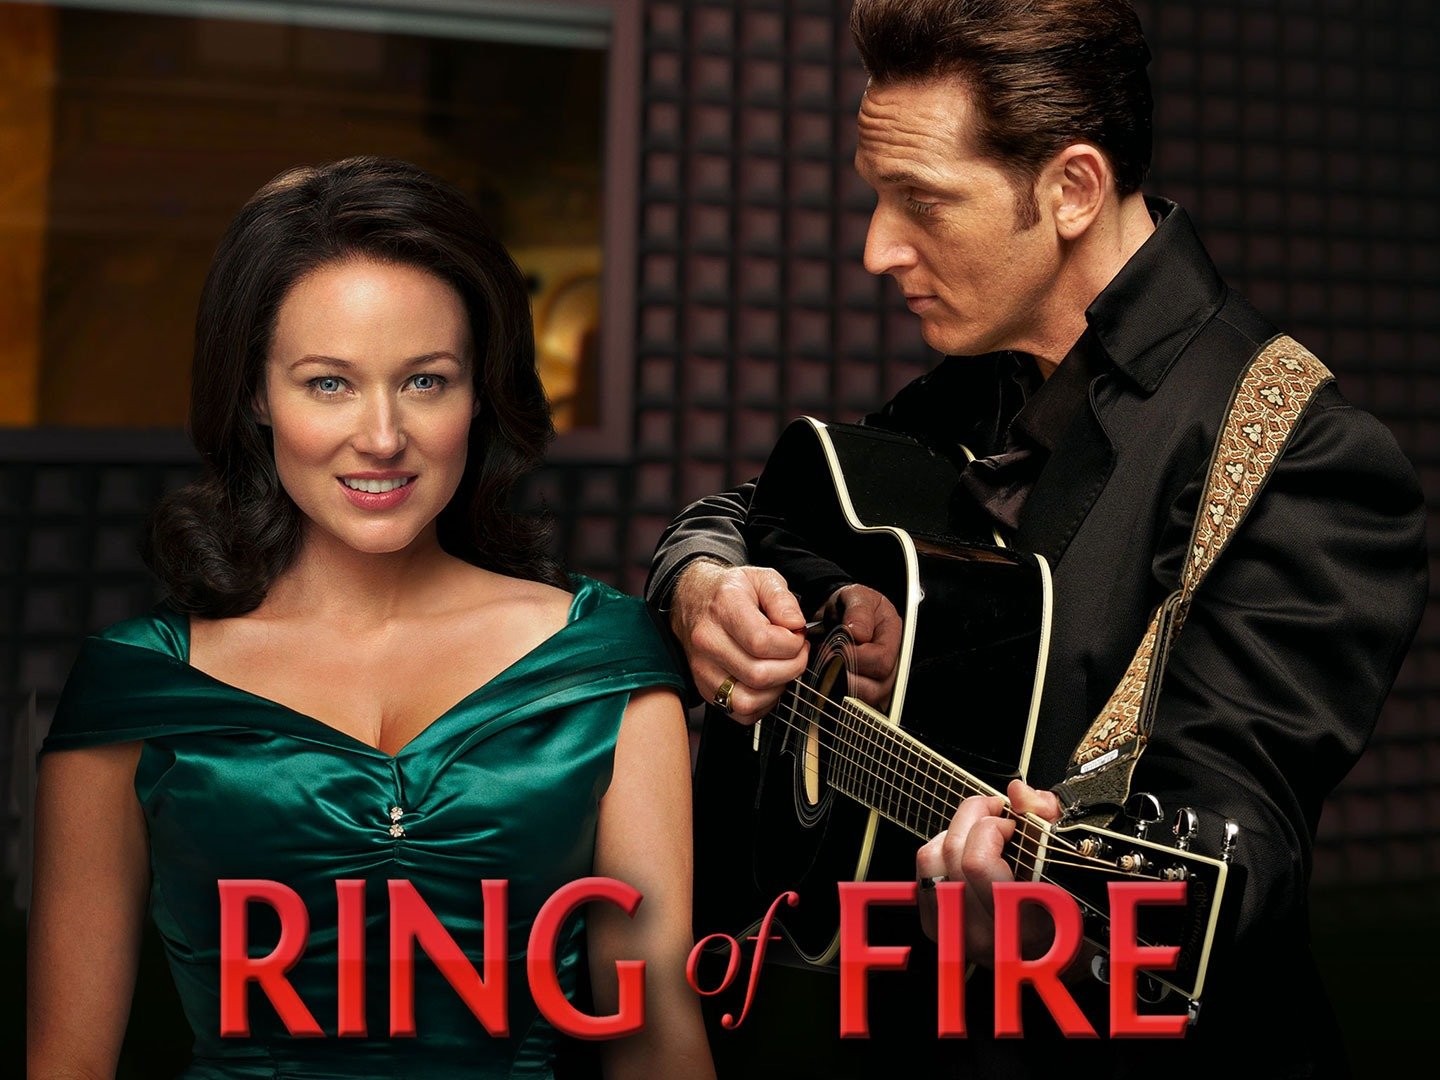 Who sang Ring of Fire on Fire Country Season 1, Episode 12?